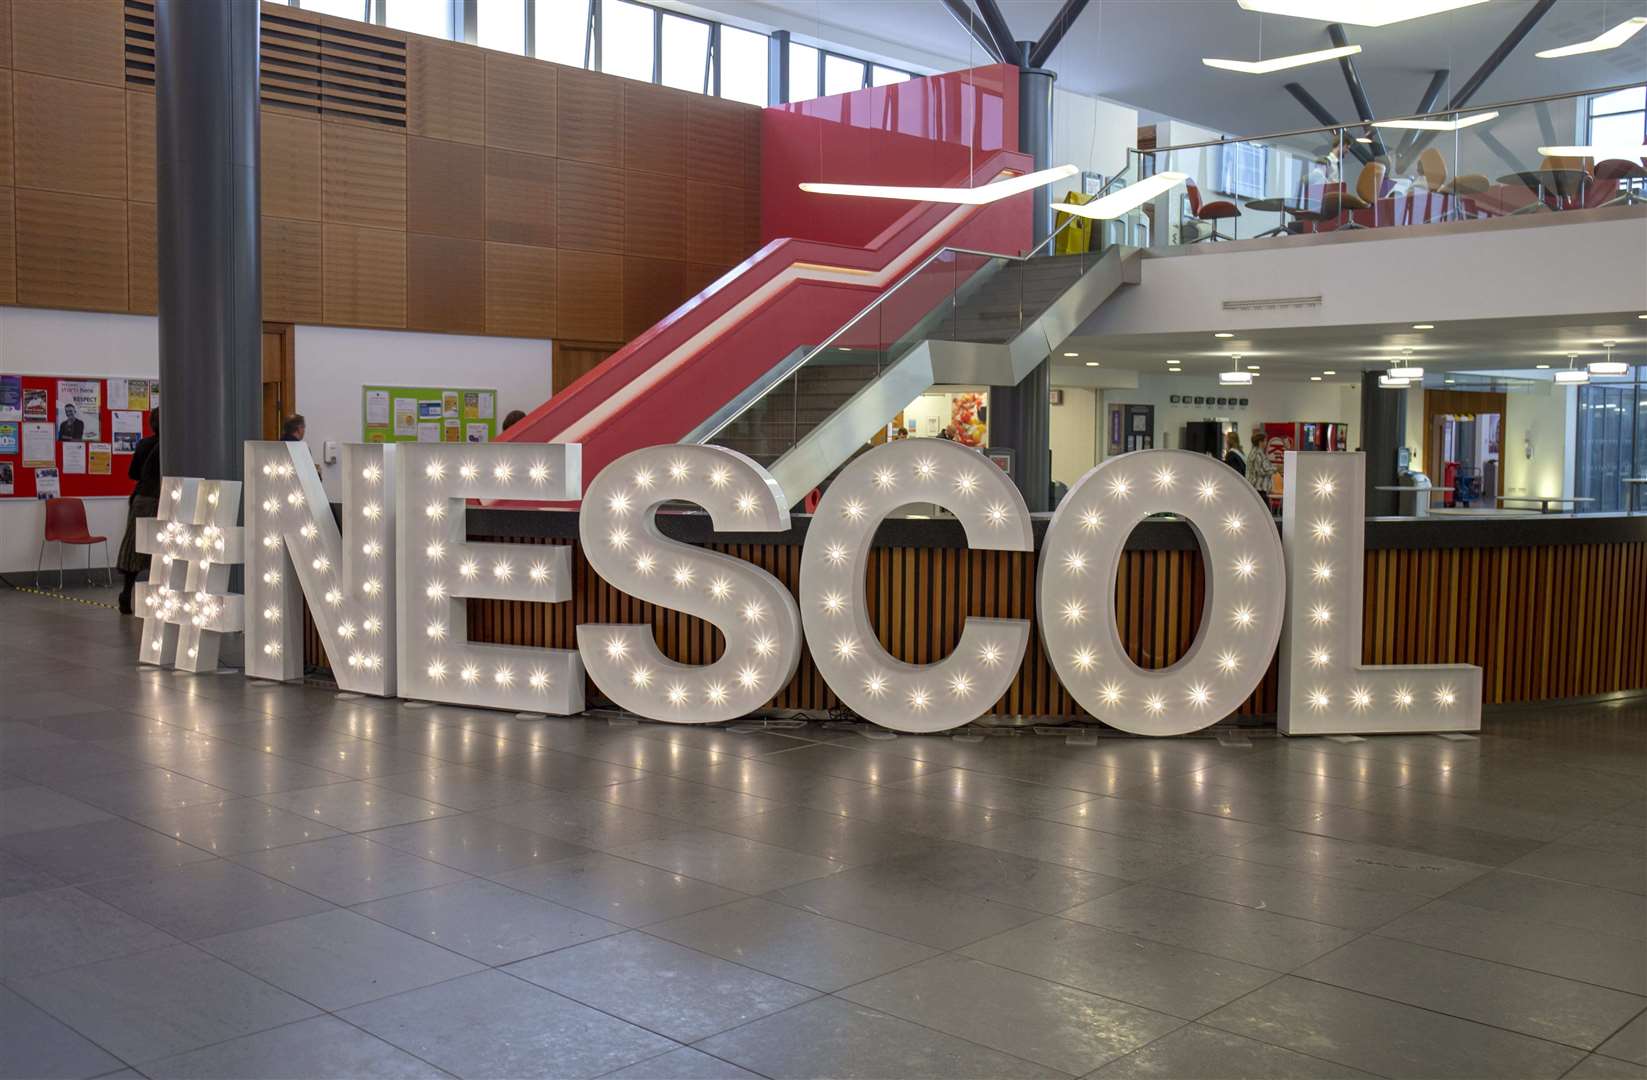 NESCOL will see support staff take strike action at the end of February.